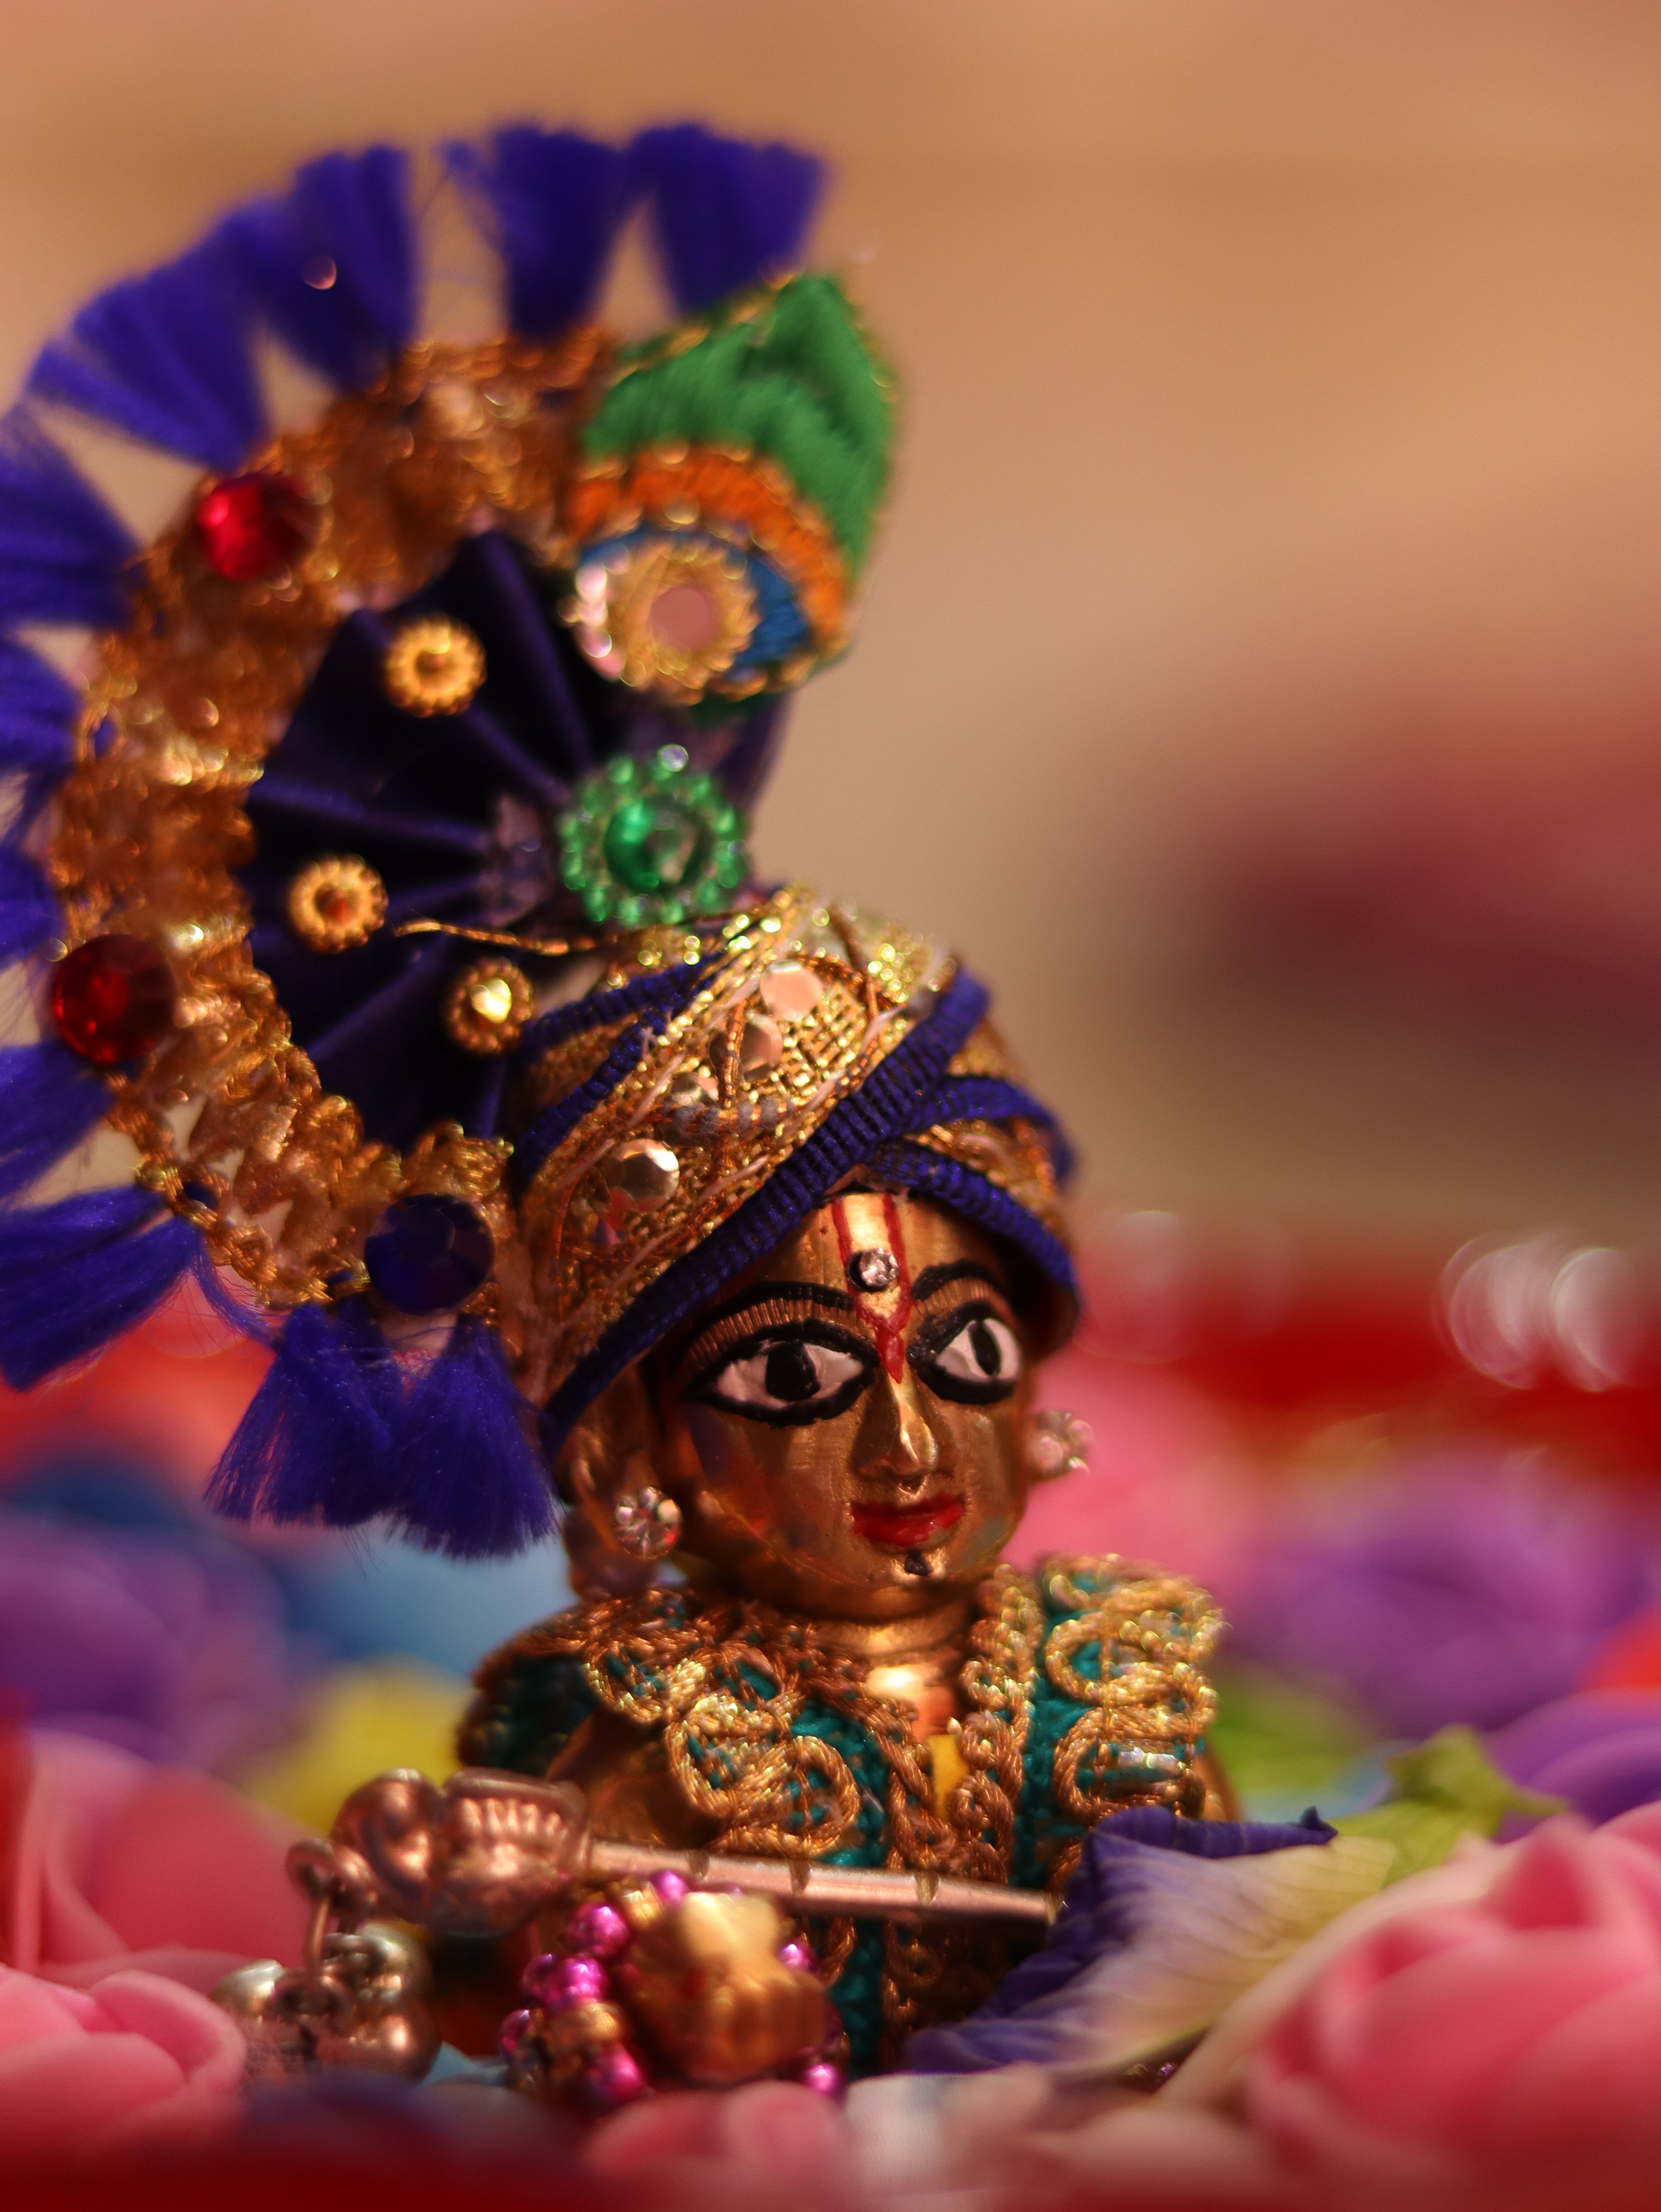 Lord krishna photos download the best free lord krishna stock photos hd images